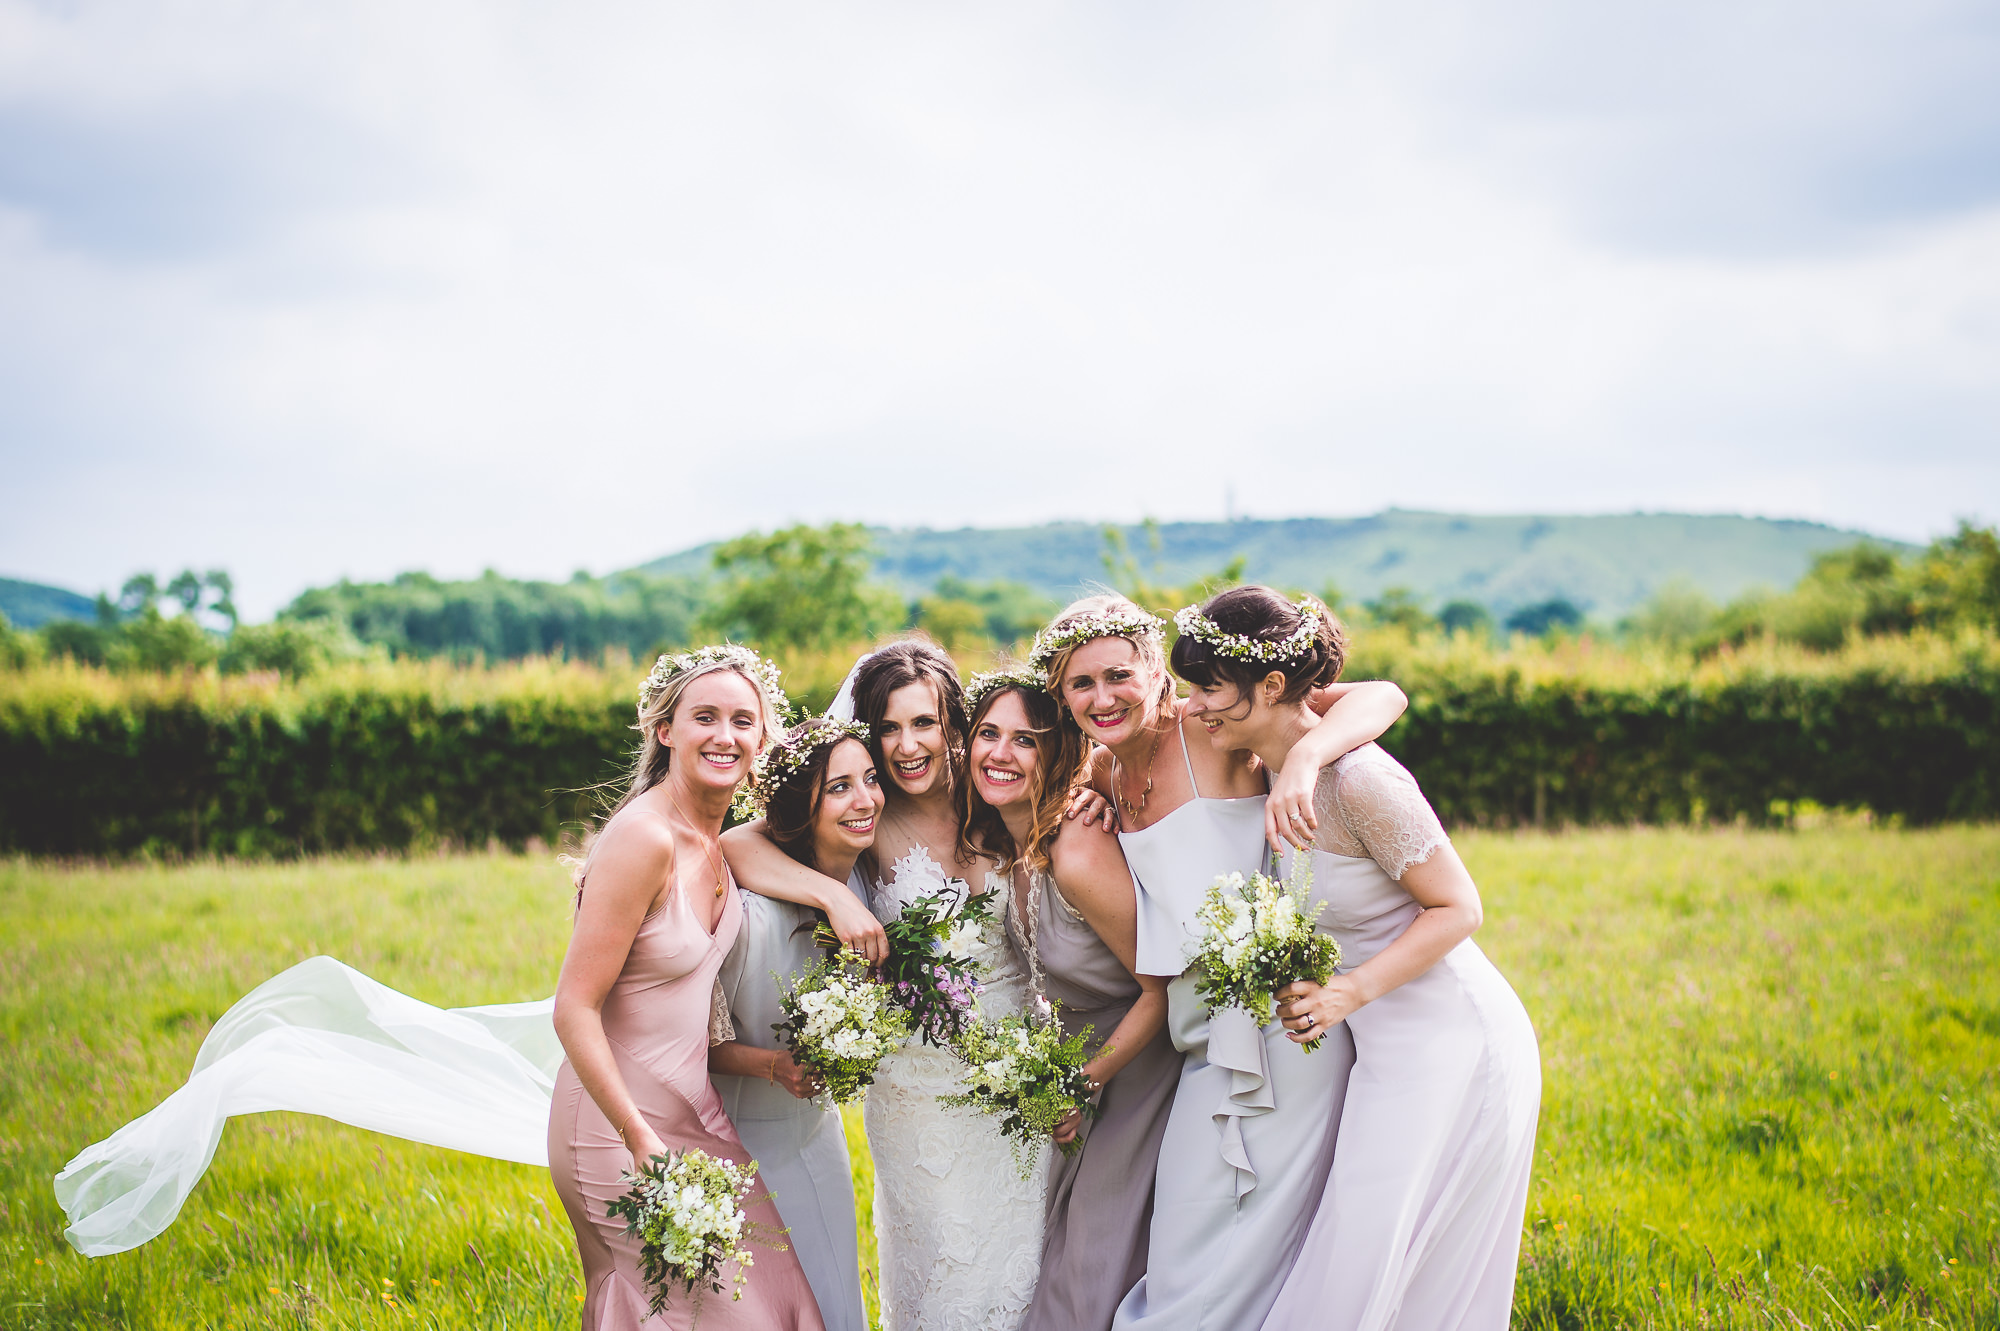 A group of bridesmaids posing for a wedding photo in a field.